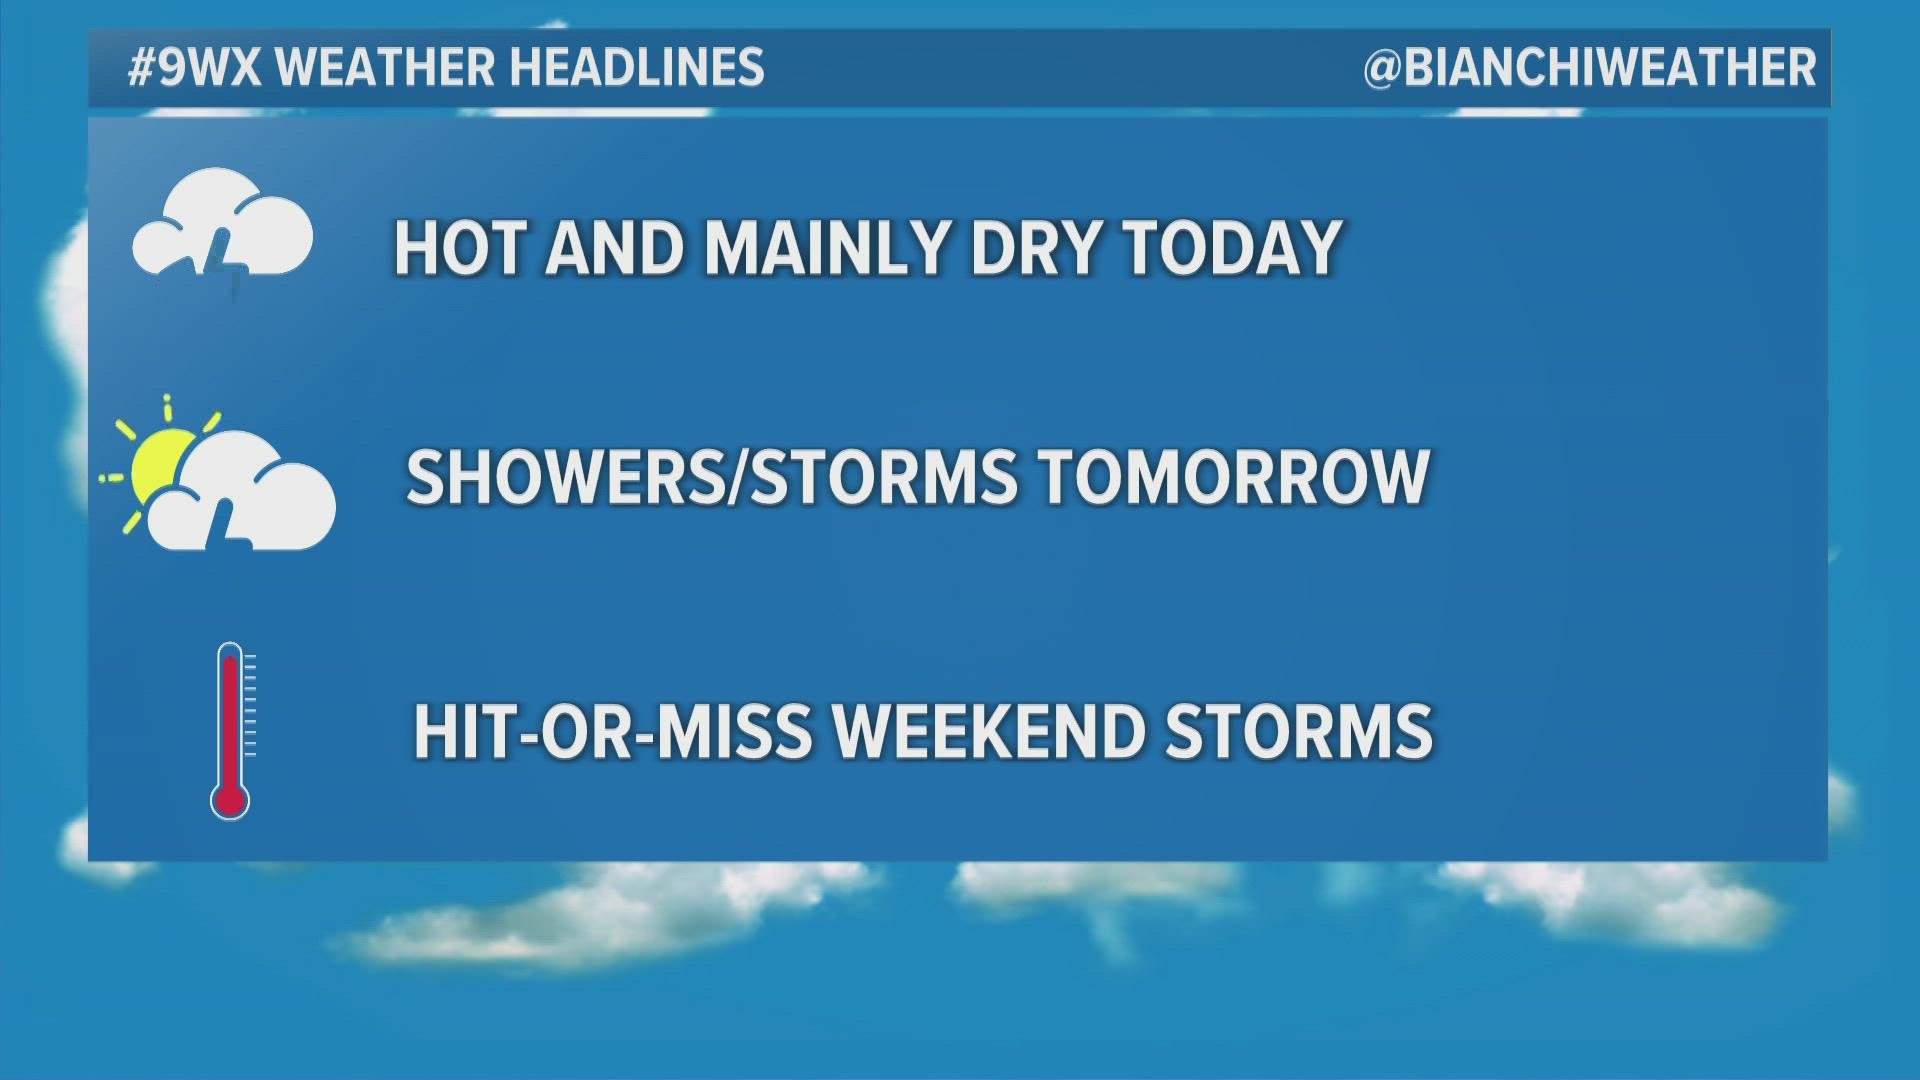 Expect a hot, mainly dry day in Denver with a slight chance for a stray afternoon shower.